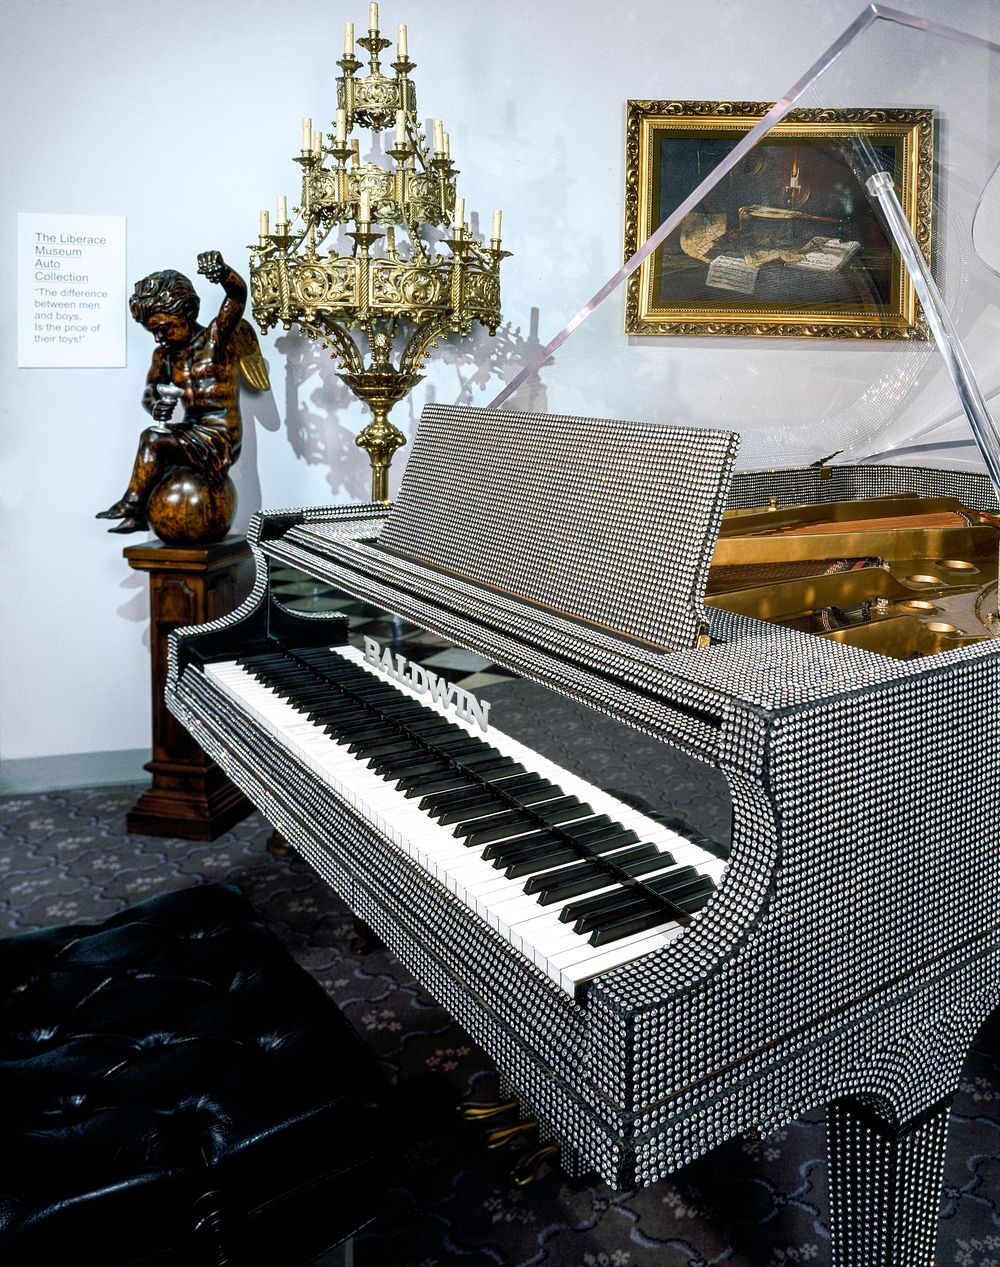 Liberace's piano. Original image from Carol M. Highsmith&rsquo;s America, Library of Congress collection. Digitally enhanced…